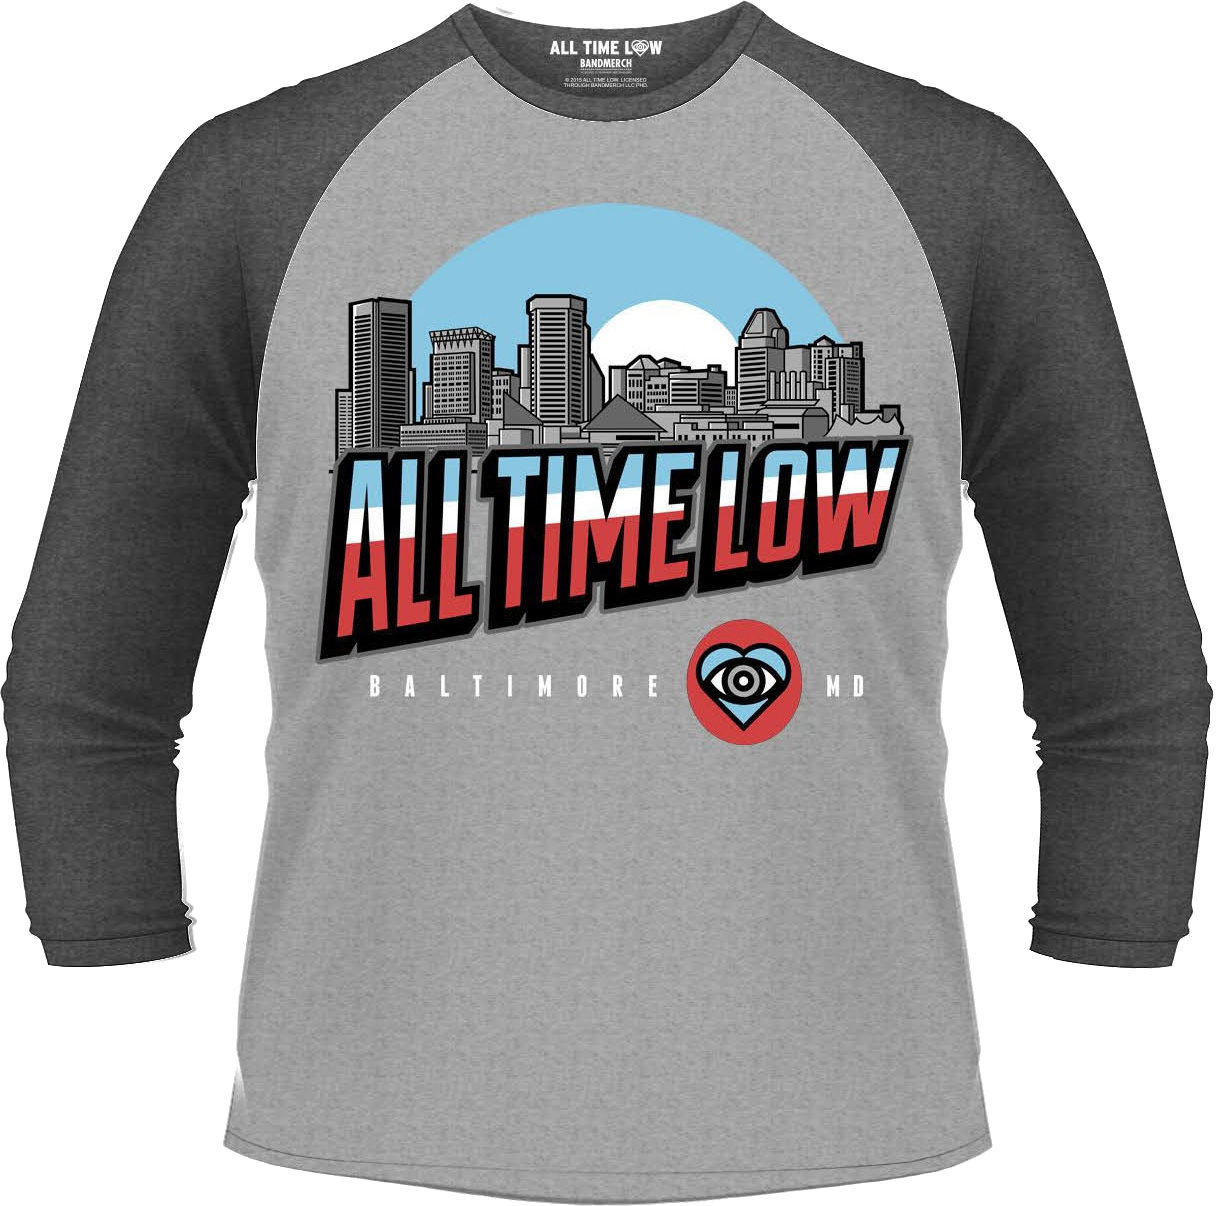 T-Shirt All Time Low T-Shirt Baltimore Male Grey 2XL